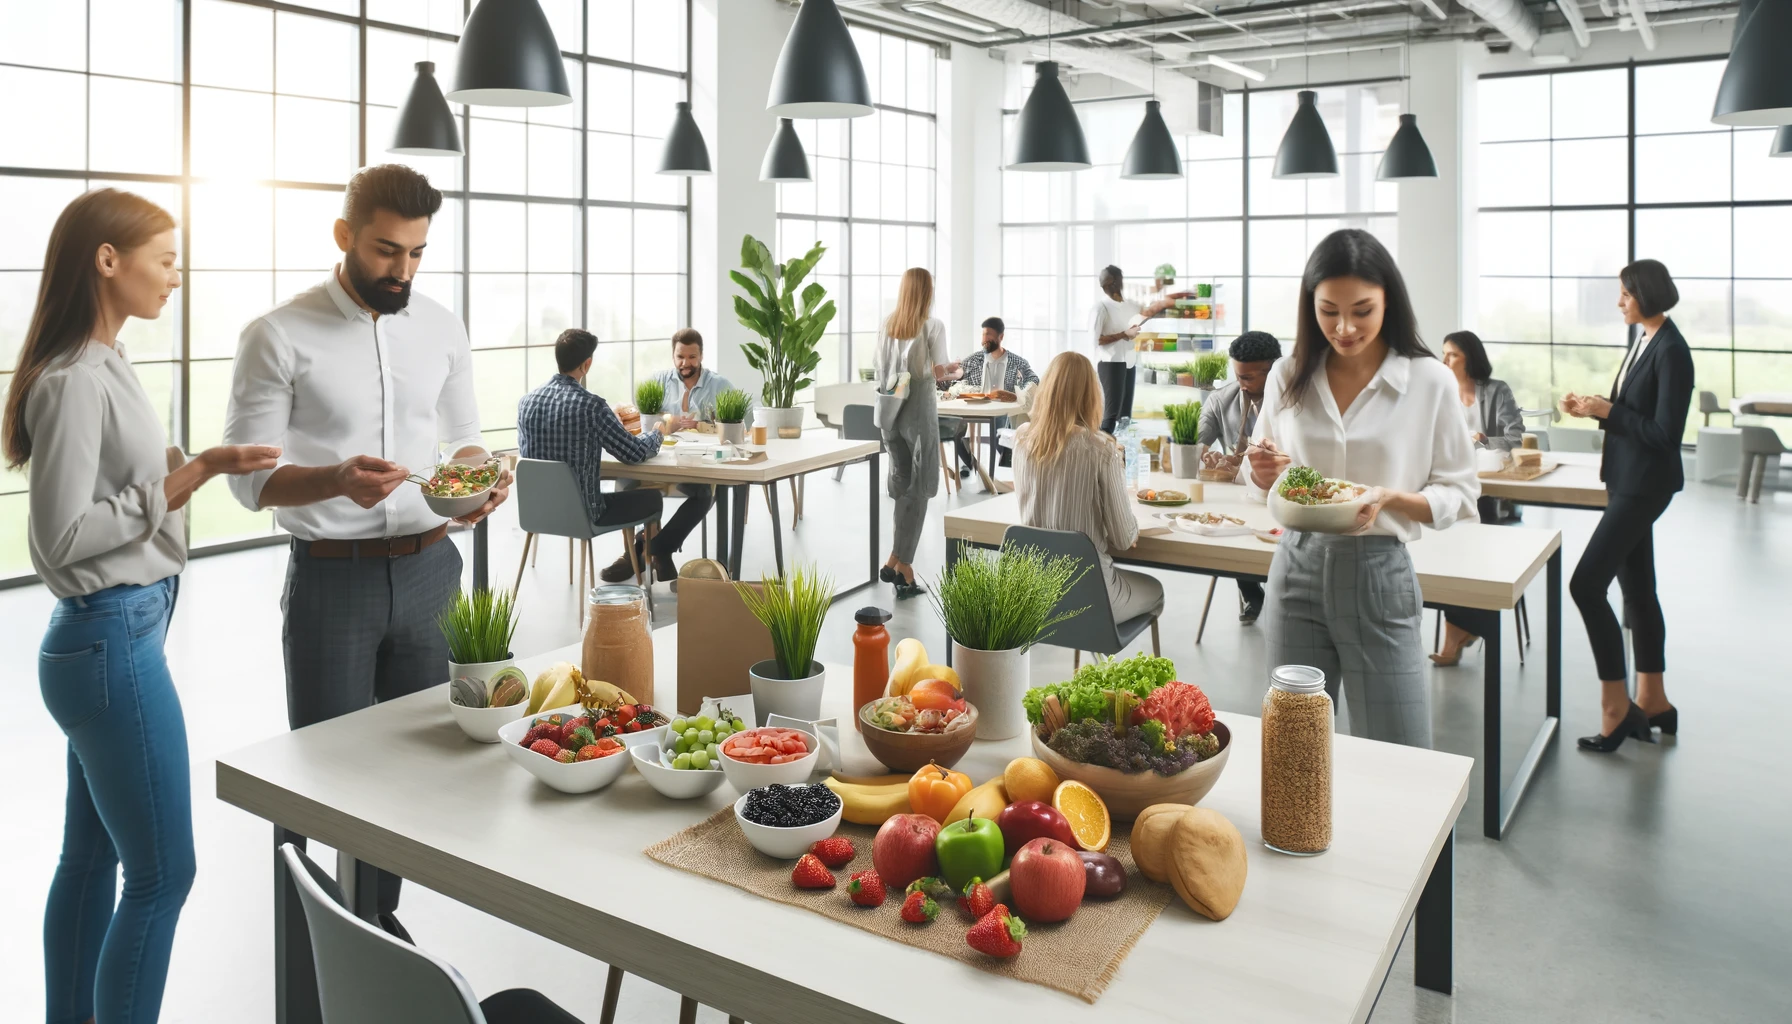 A modern office break room with a variety of healthy food options on a table including fruits salads whole grains and protein sources